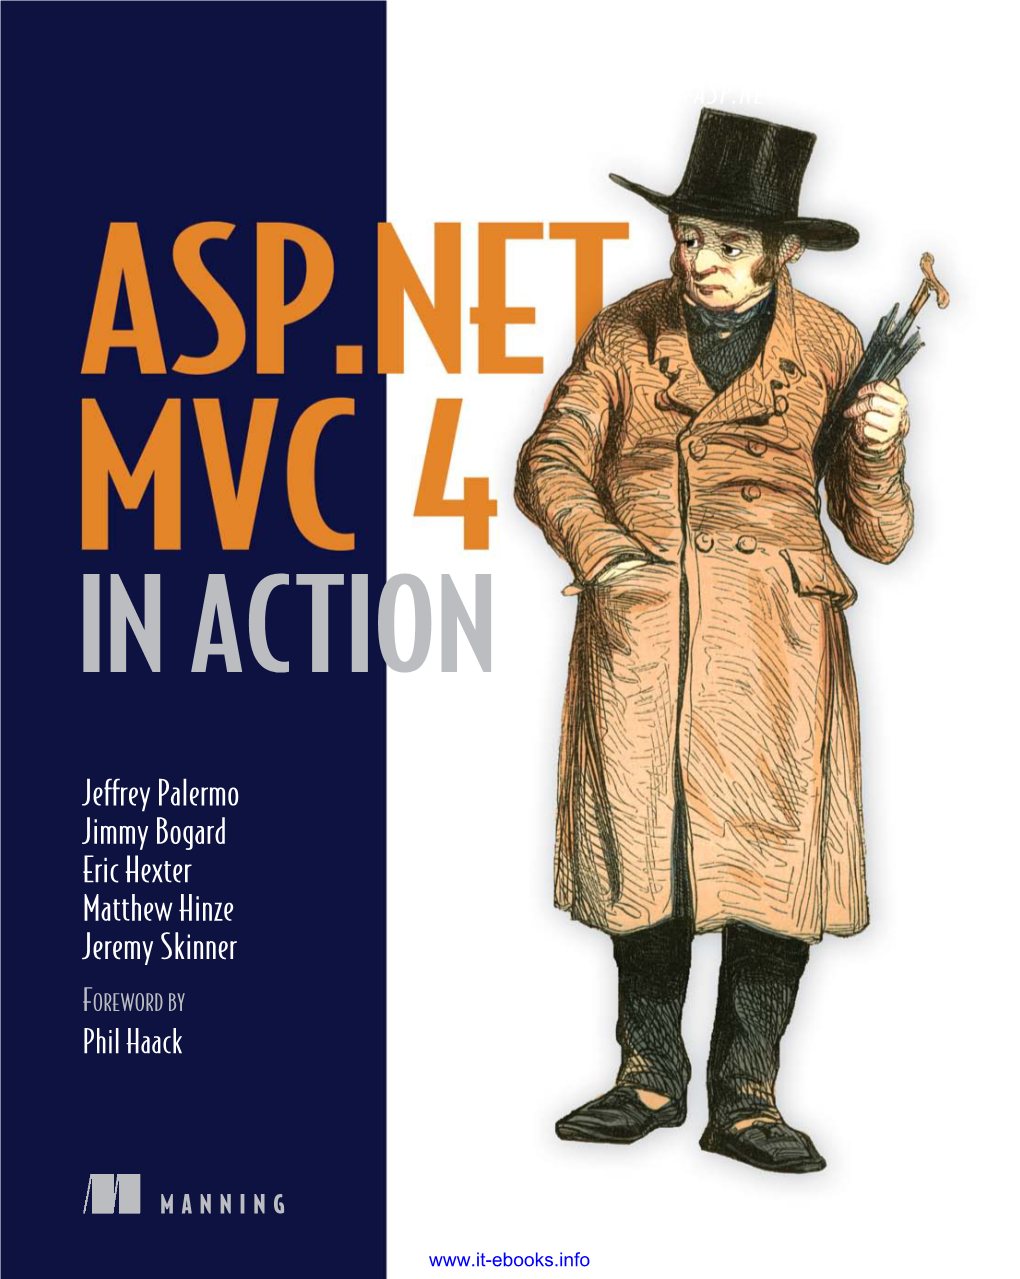 ASP.NET MVC 4 in Action a Revised Edition of ASP.NET MVC 2 in Action